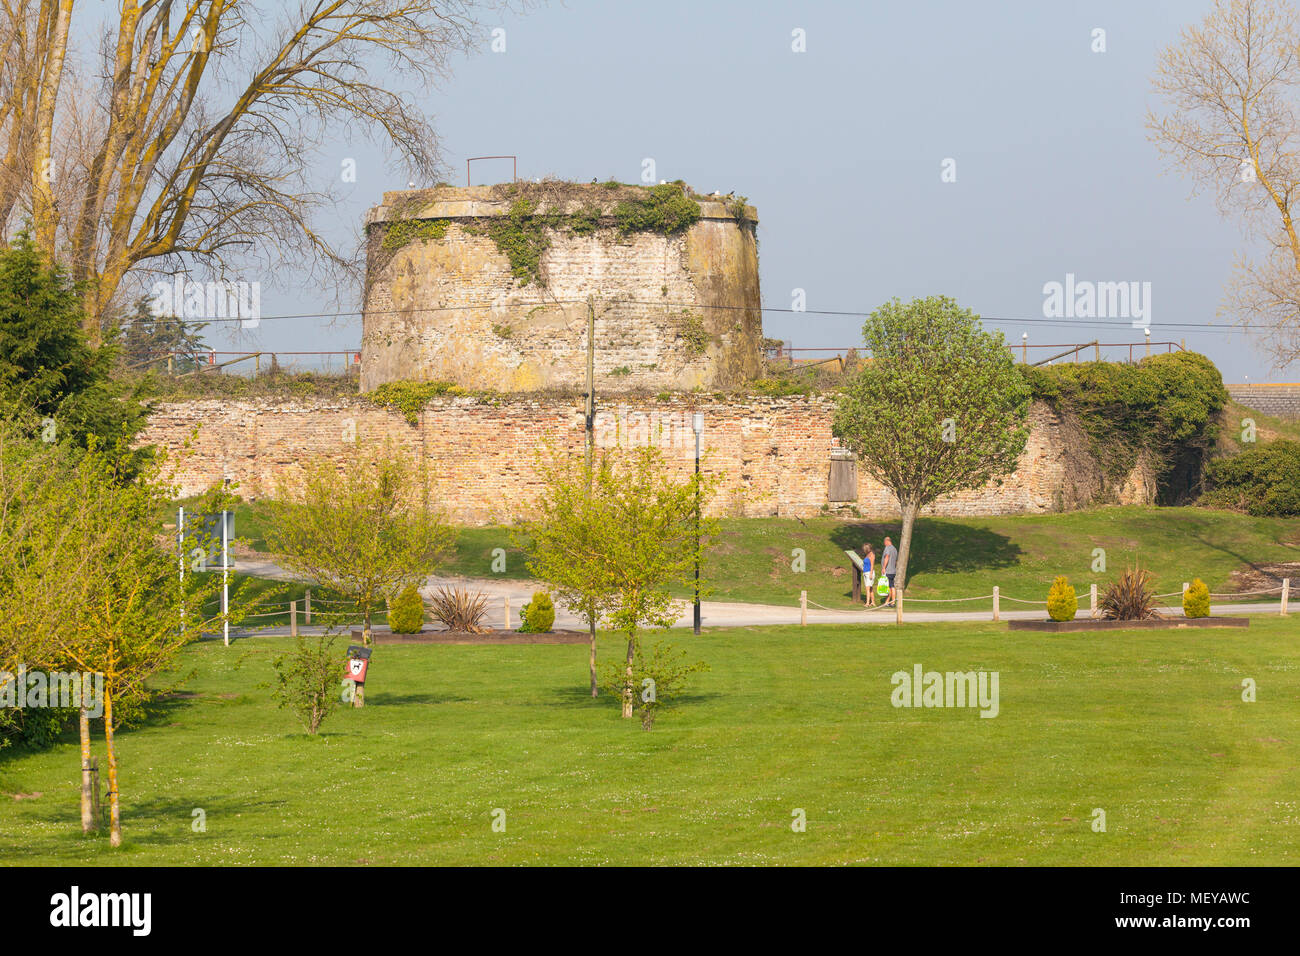 Martello tower 28, Rye Harbour, east sussex, uk Stock Photo